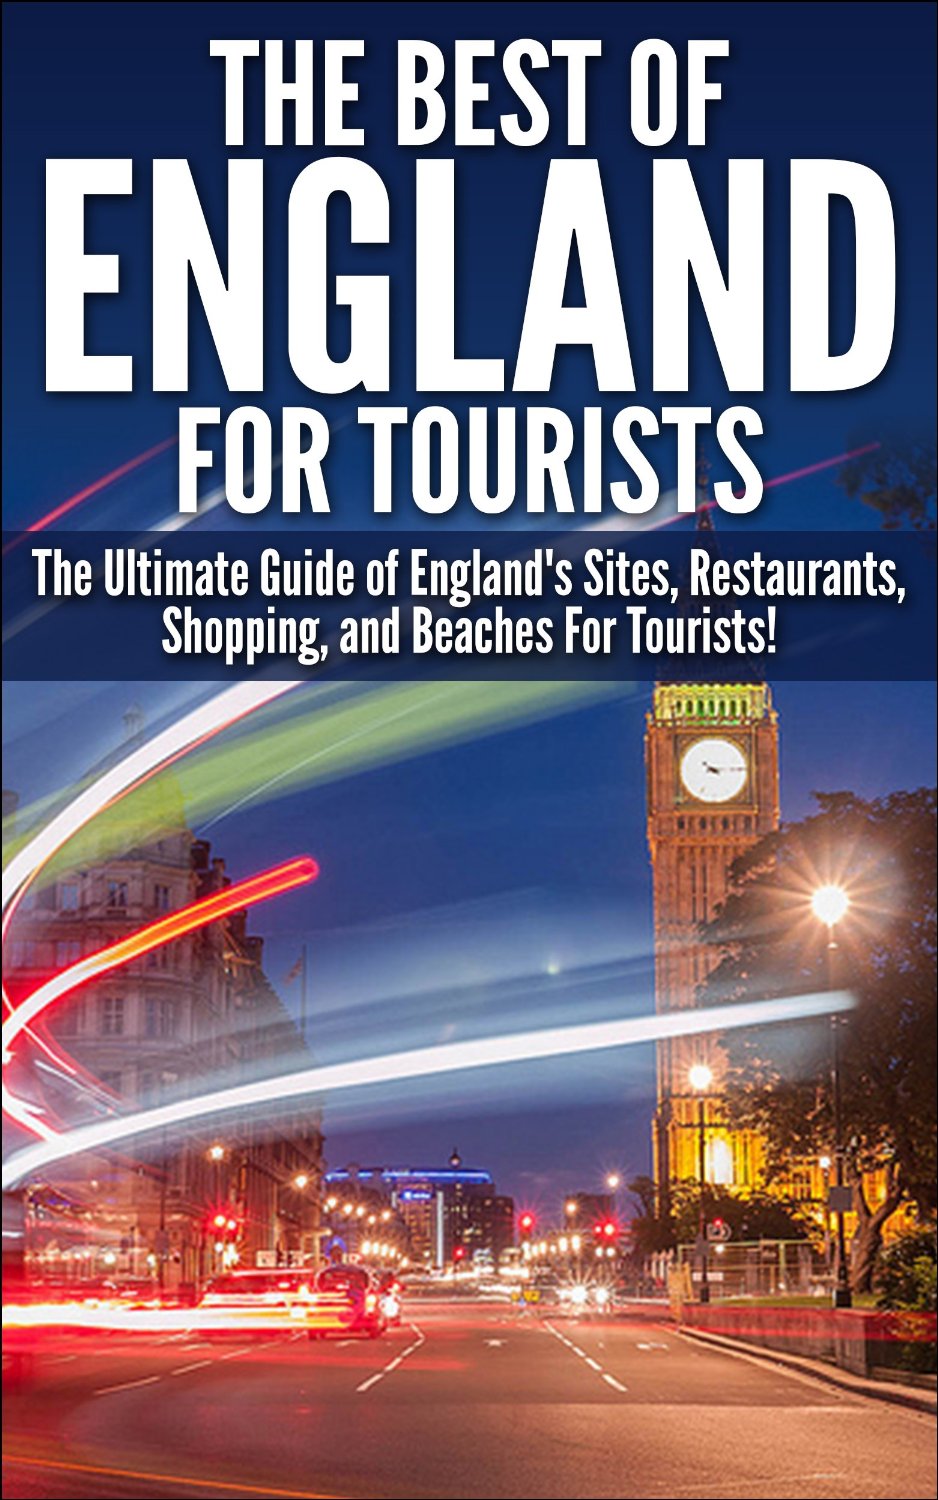 The Best of England for Tourists: The Ultimate Guide of England’s Sites, Restaurants, Shopping, and Beaches for Tourists! (Travelling, Travelling Guide, … Sites, Adventures, Beaches, Restaurants) by Getaway Guides